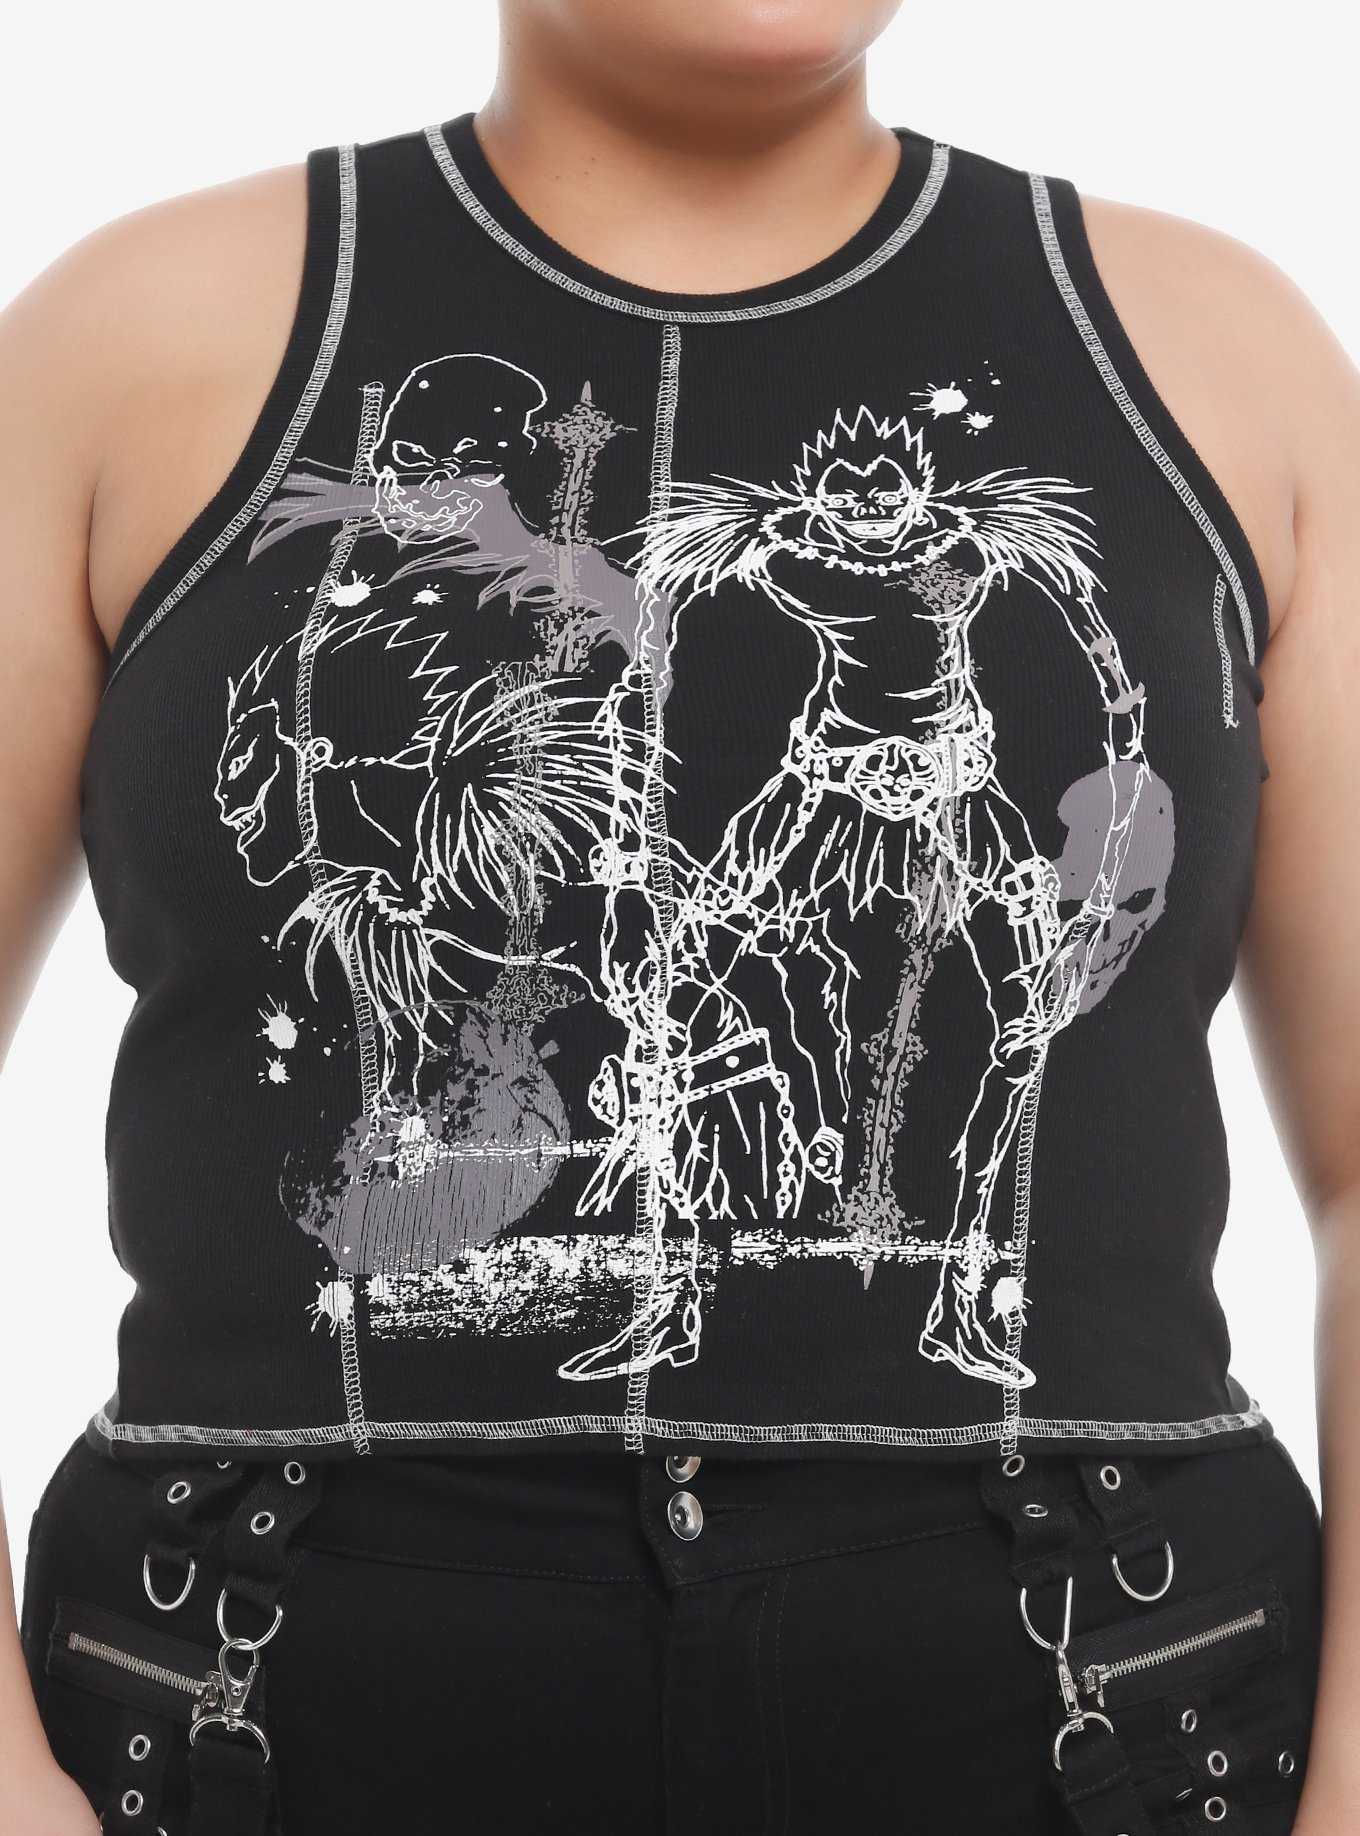 Death Note Ryuk Outline Ribbed Girls Crop Tank Top Plus Size, , hi-res